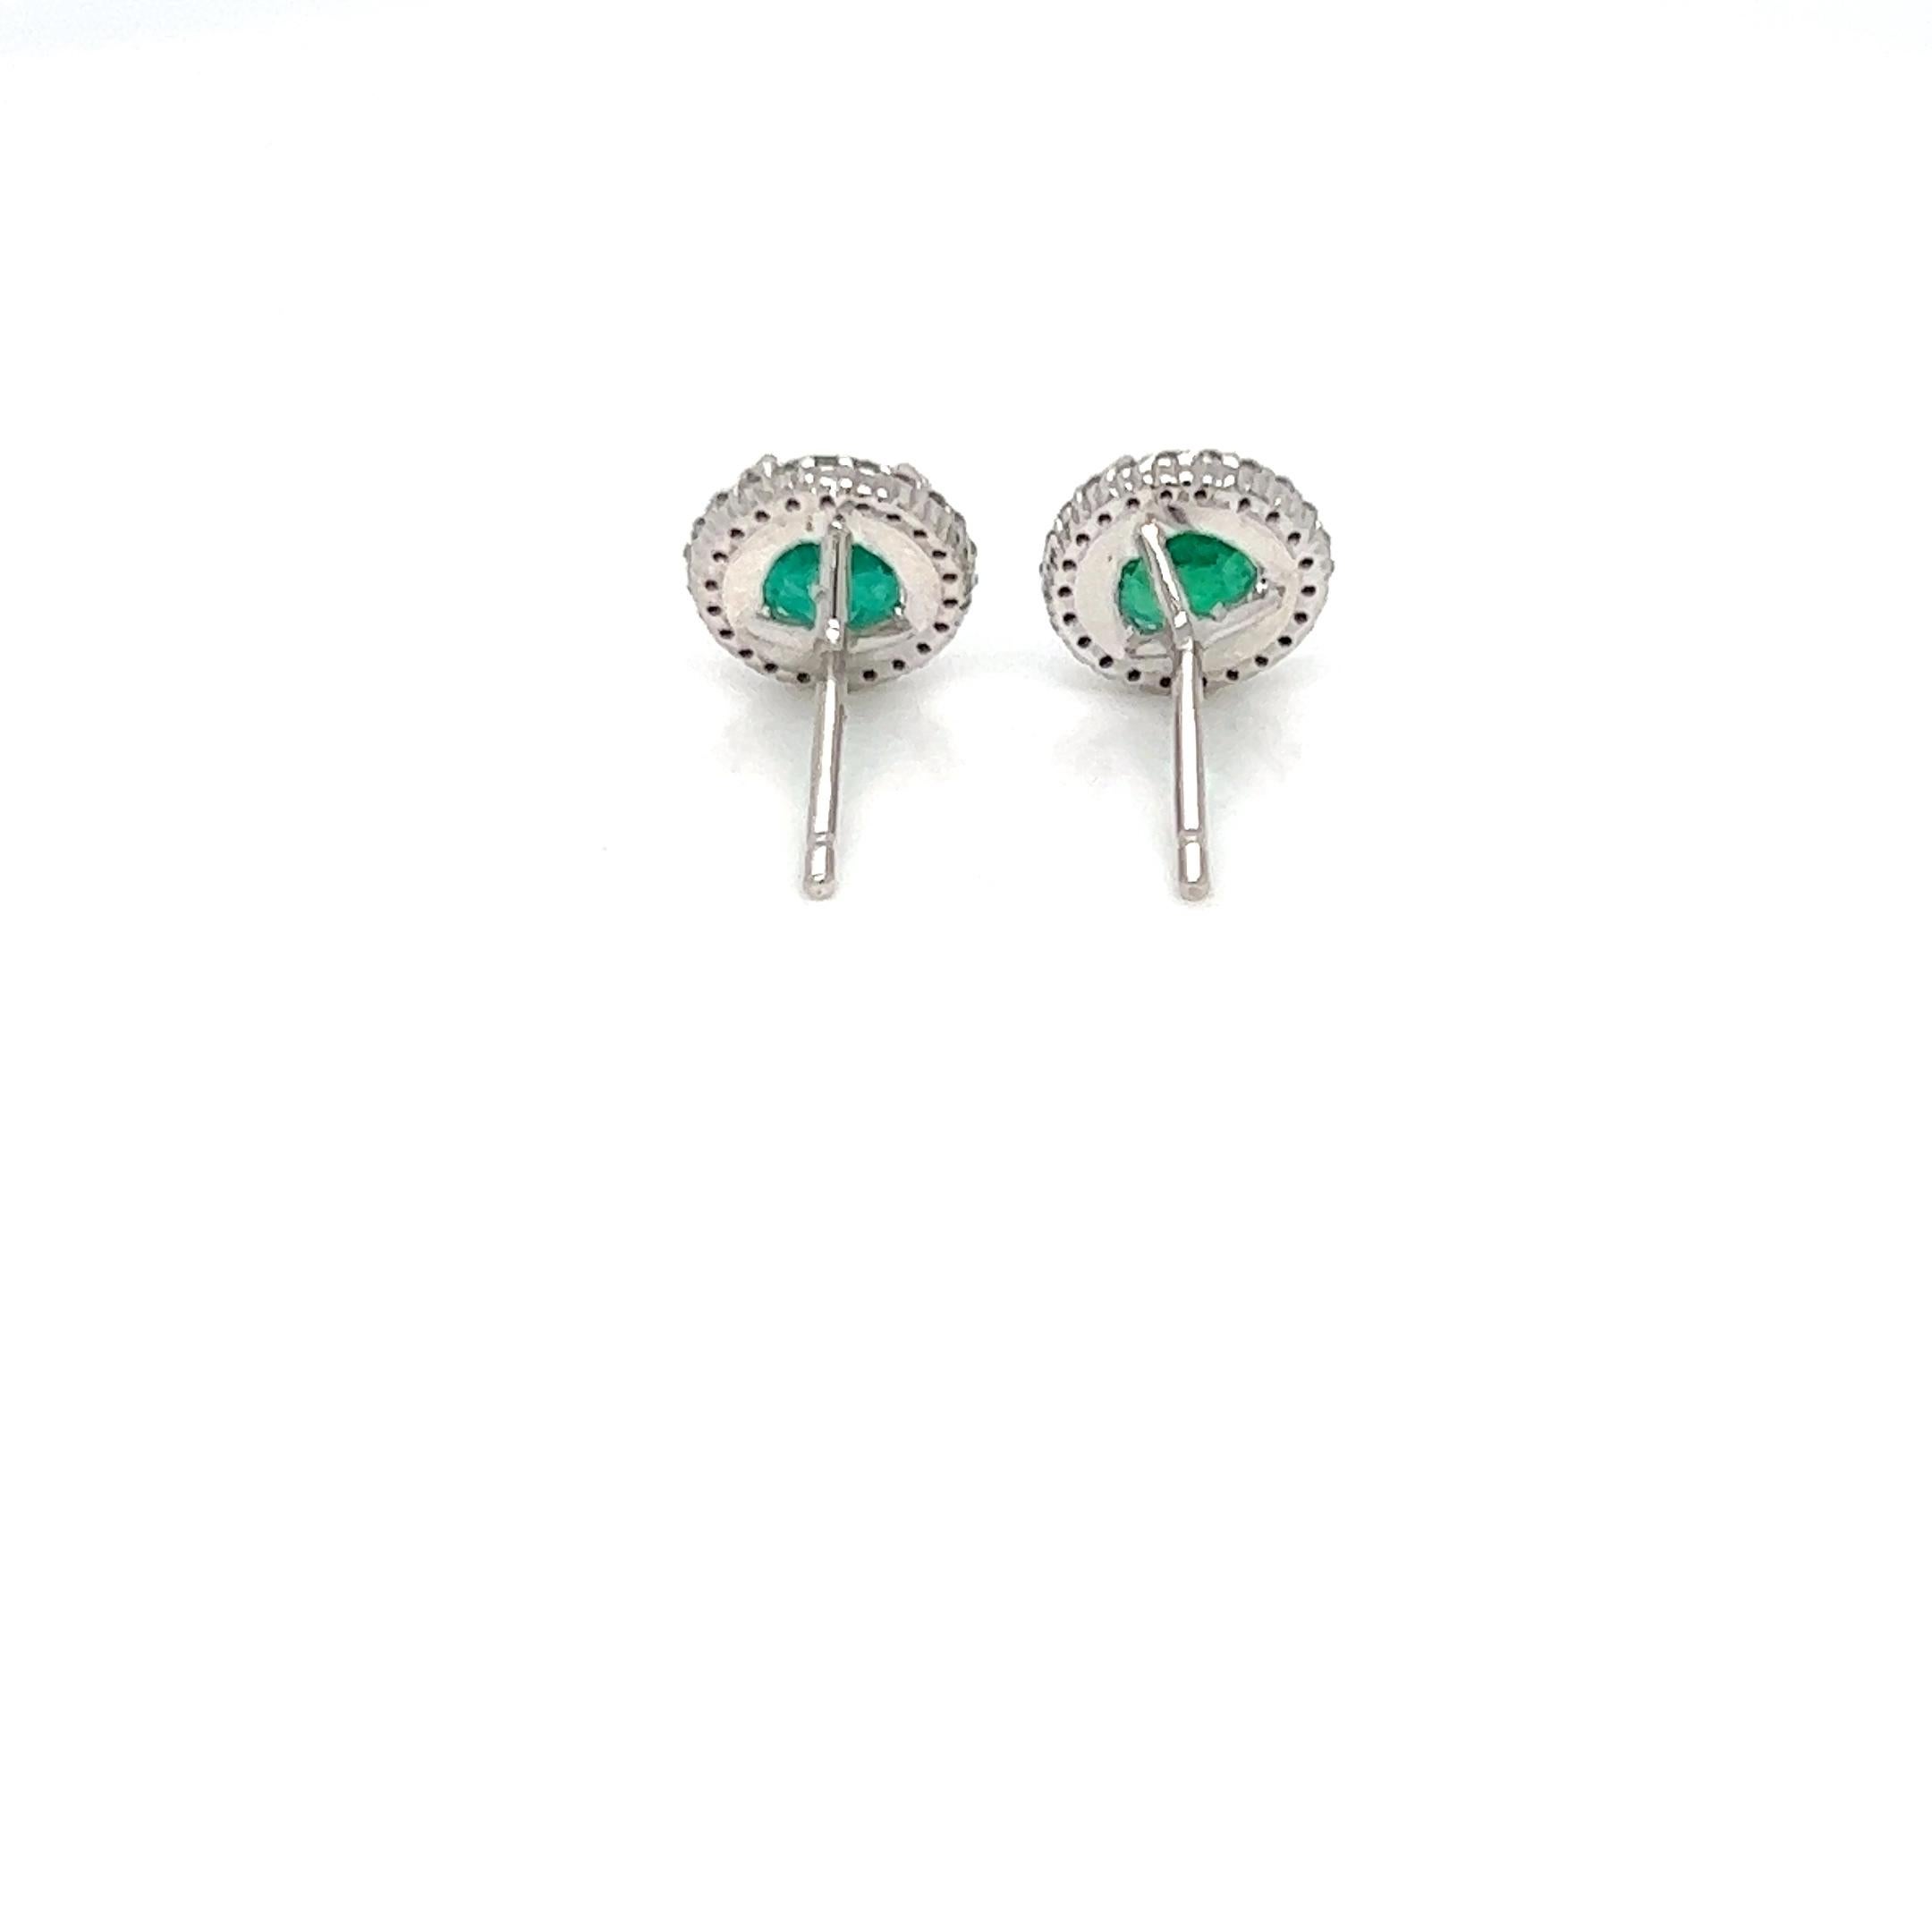 Modern 1.67 Carats Emerald and Diamond Stud Earrings in 18k White Gold For Sale